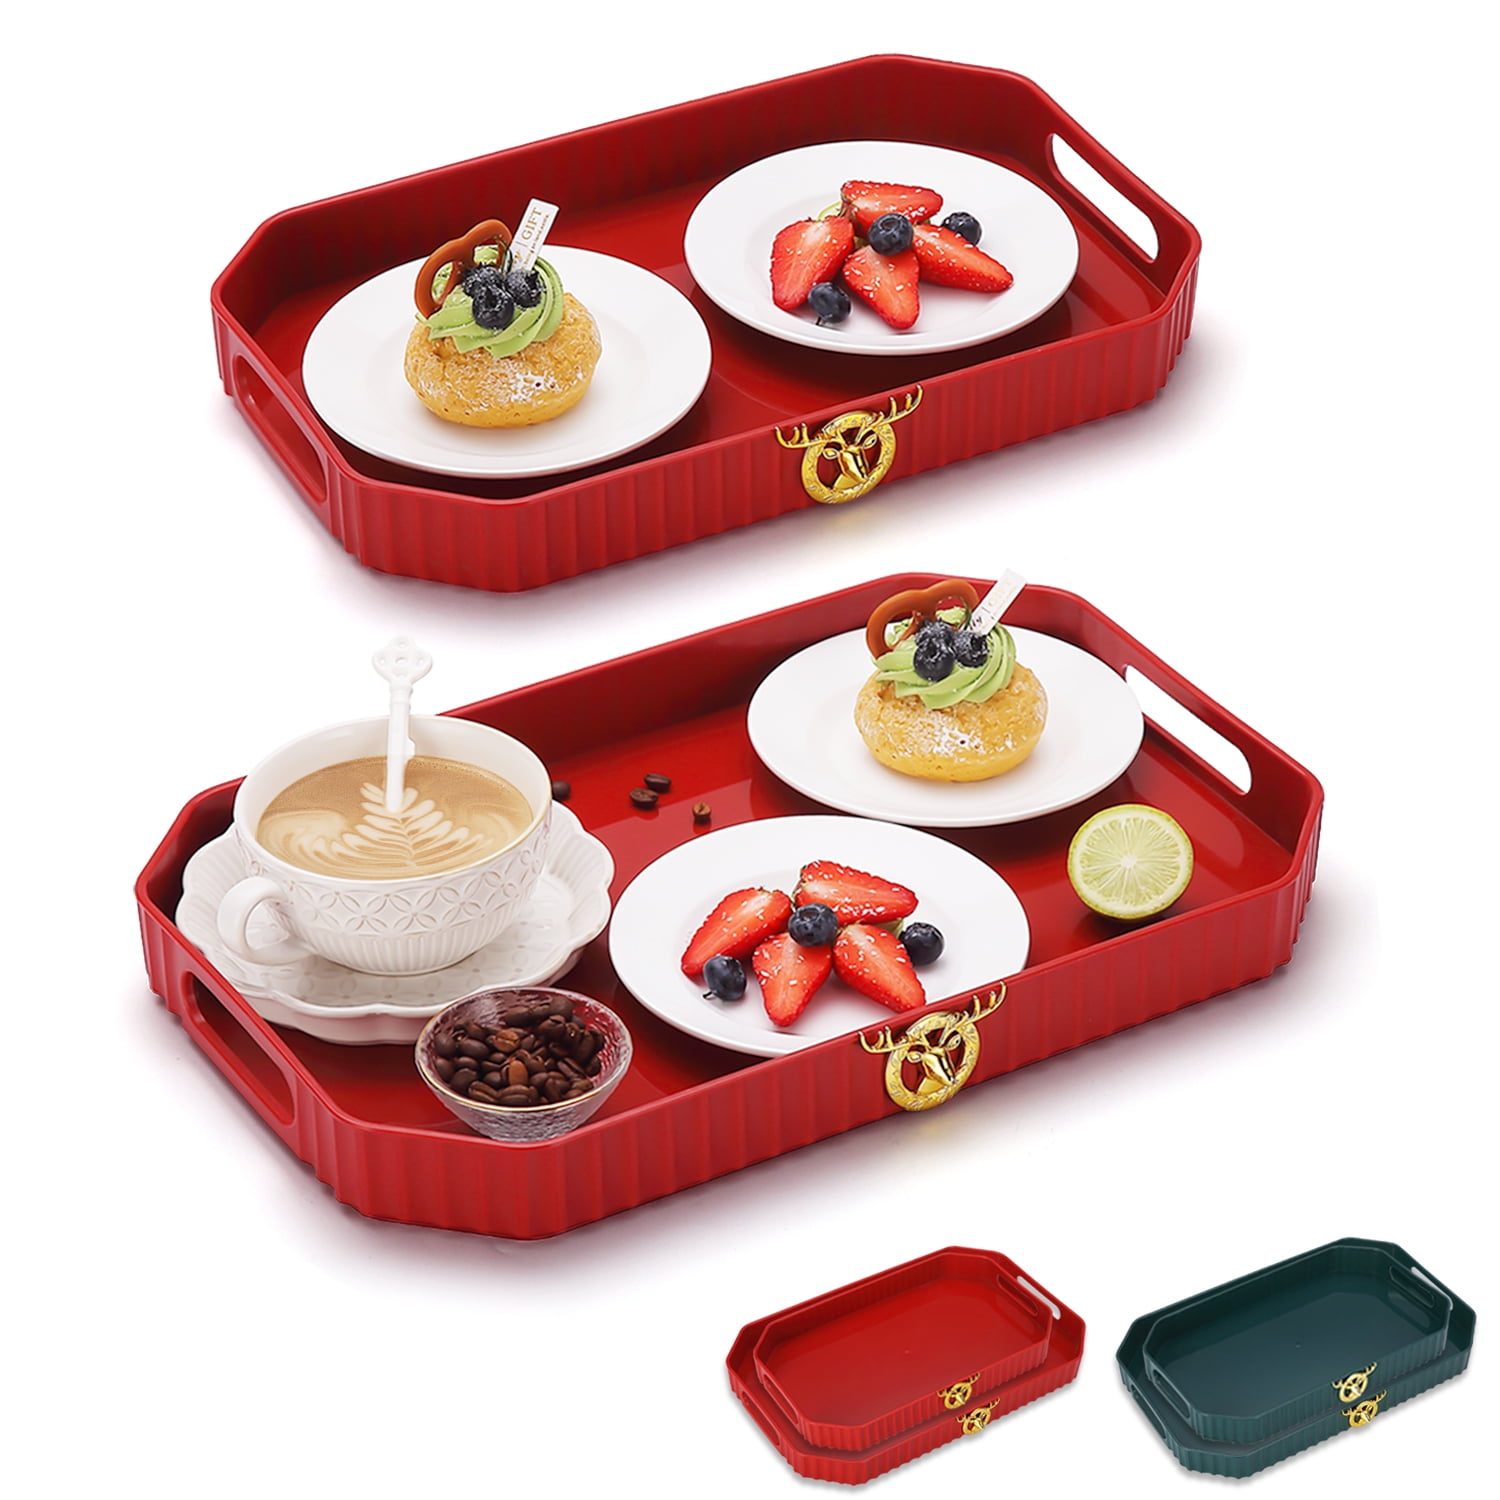 Rectangular Non Slip Serving Tray with Handles That are Easy to Grip  Silicone Nubs Non Skid Plastic Food Tray - Portable Dinner Trays for Eating  